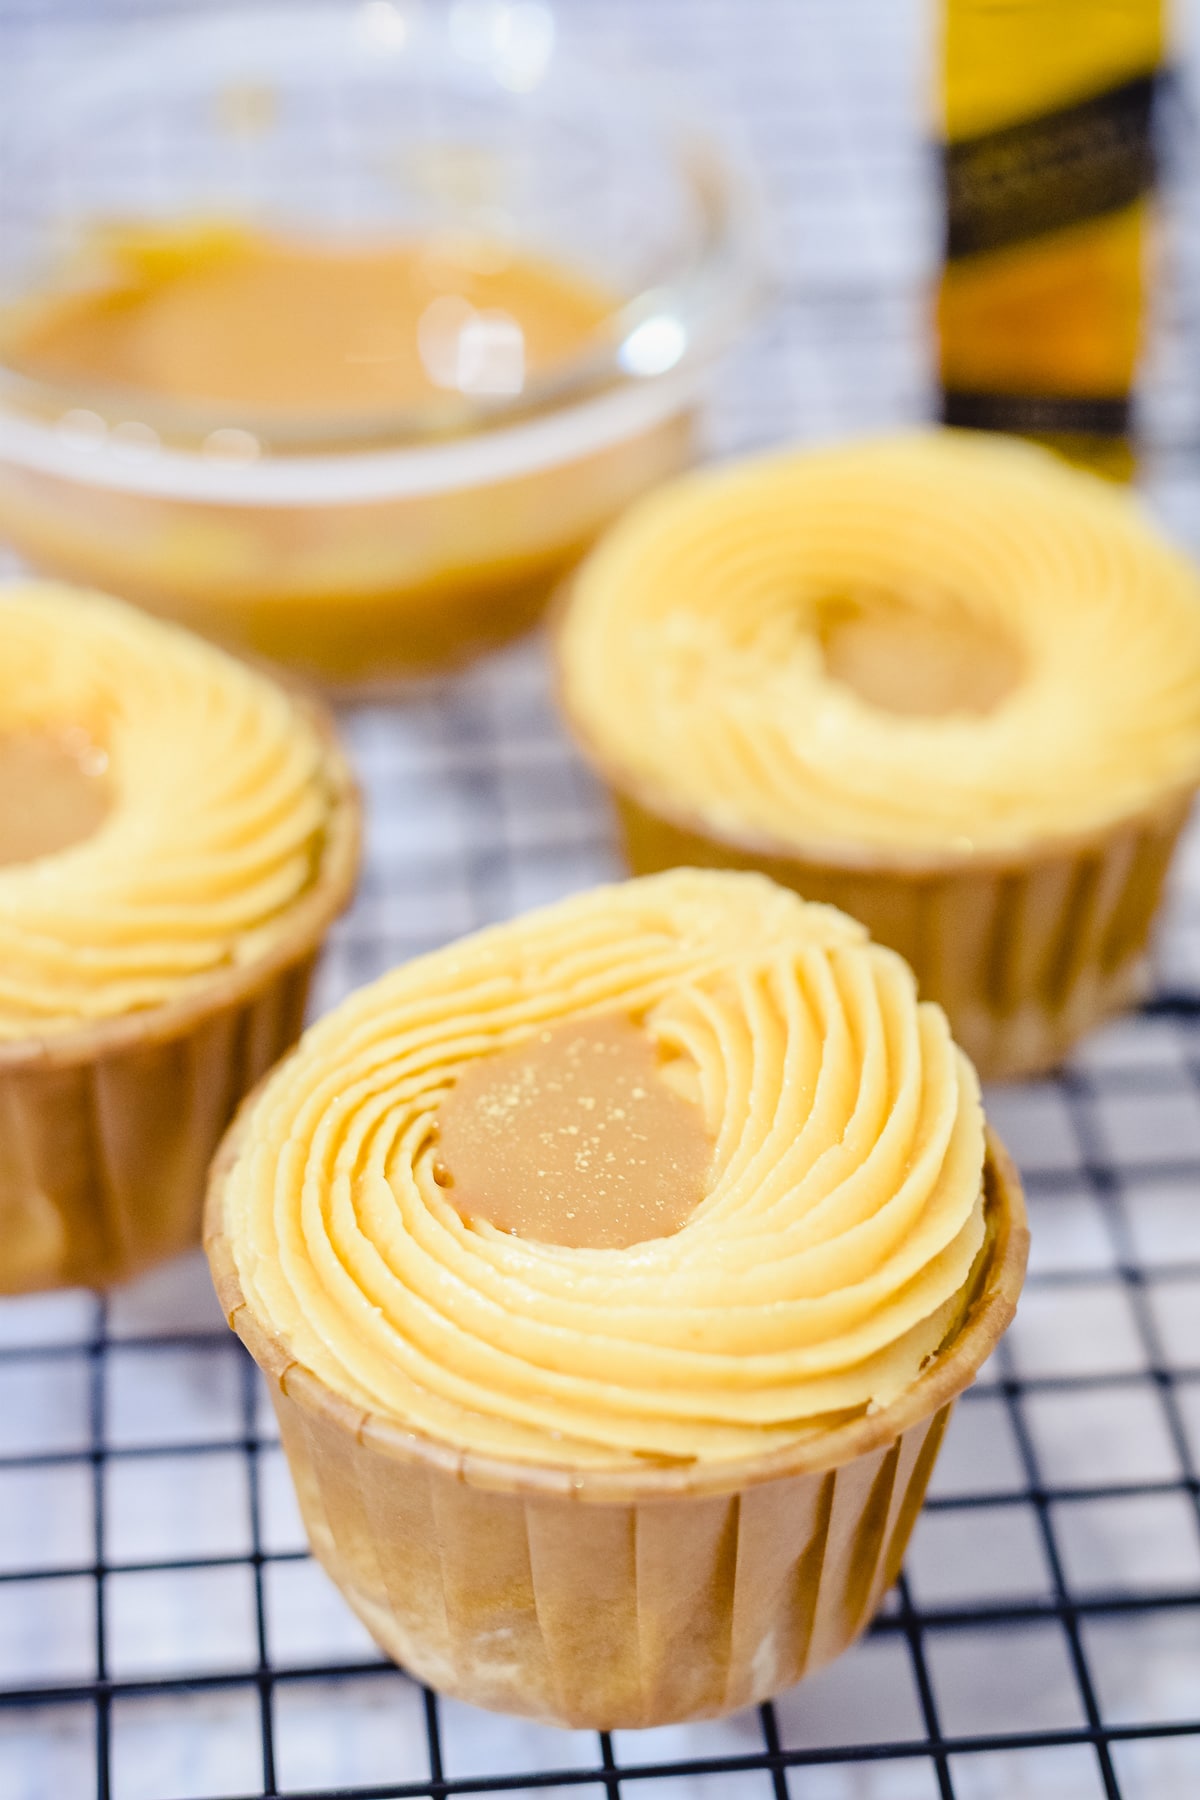 salted caramel whiskey cupcakes on wire rack with a whisky bottle and caramel in a bowl